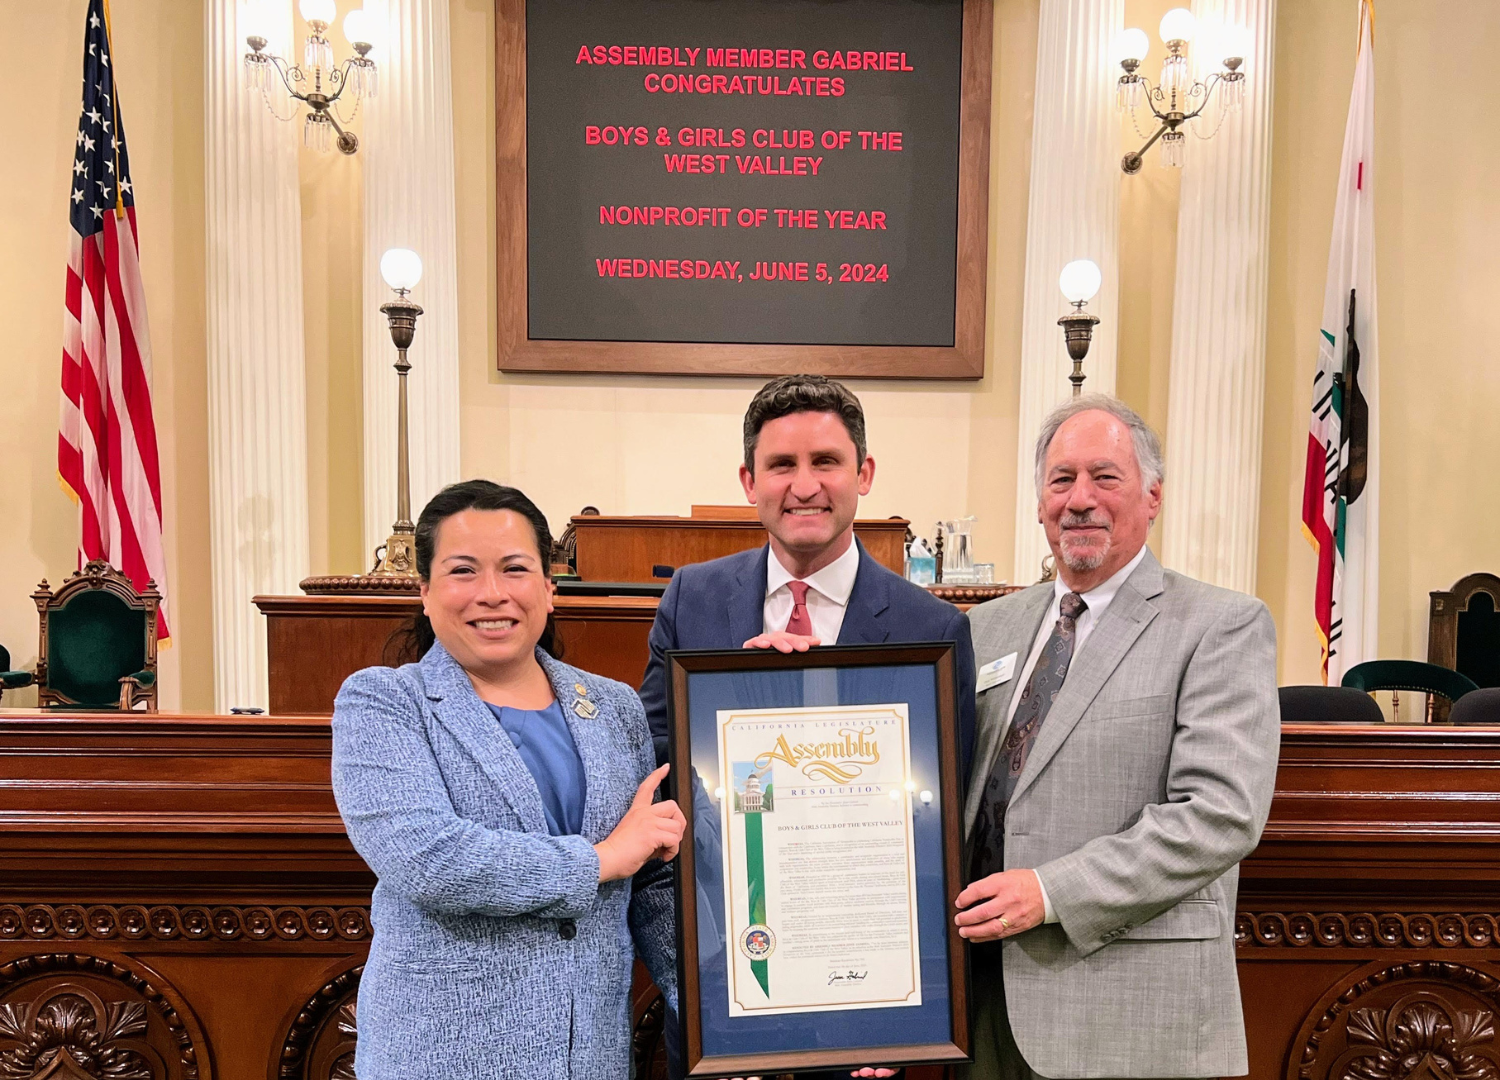 Assemblymember Jesse Gabriel (AD 46) holds a Resolution with Boys & Girls Club of West Valley CEO Ragsdale and Chairman Weissman